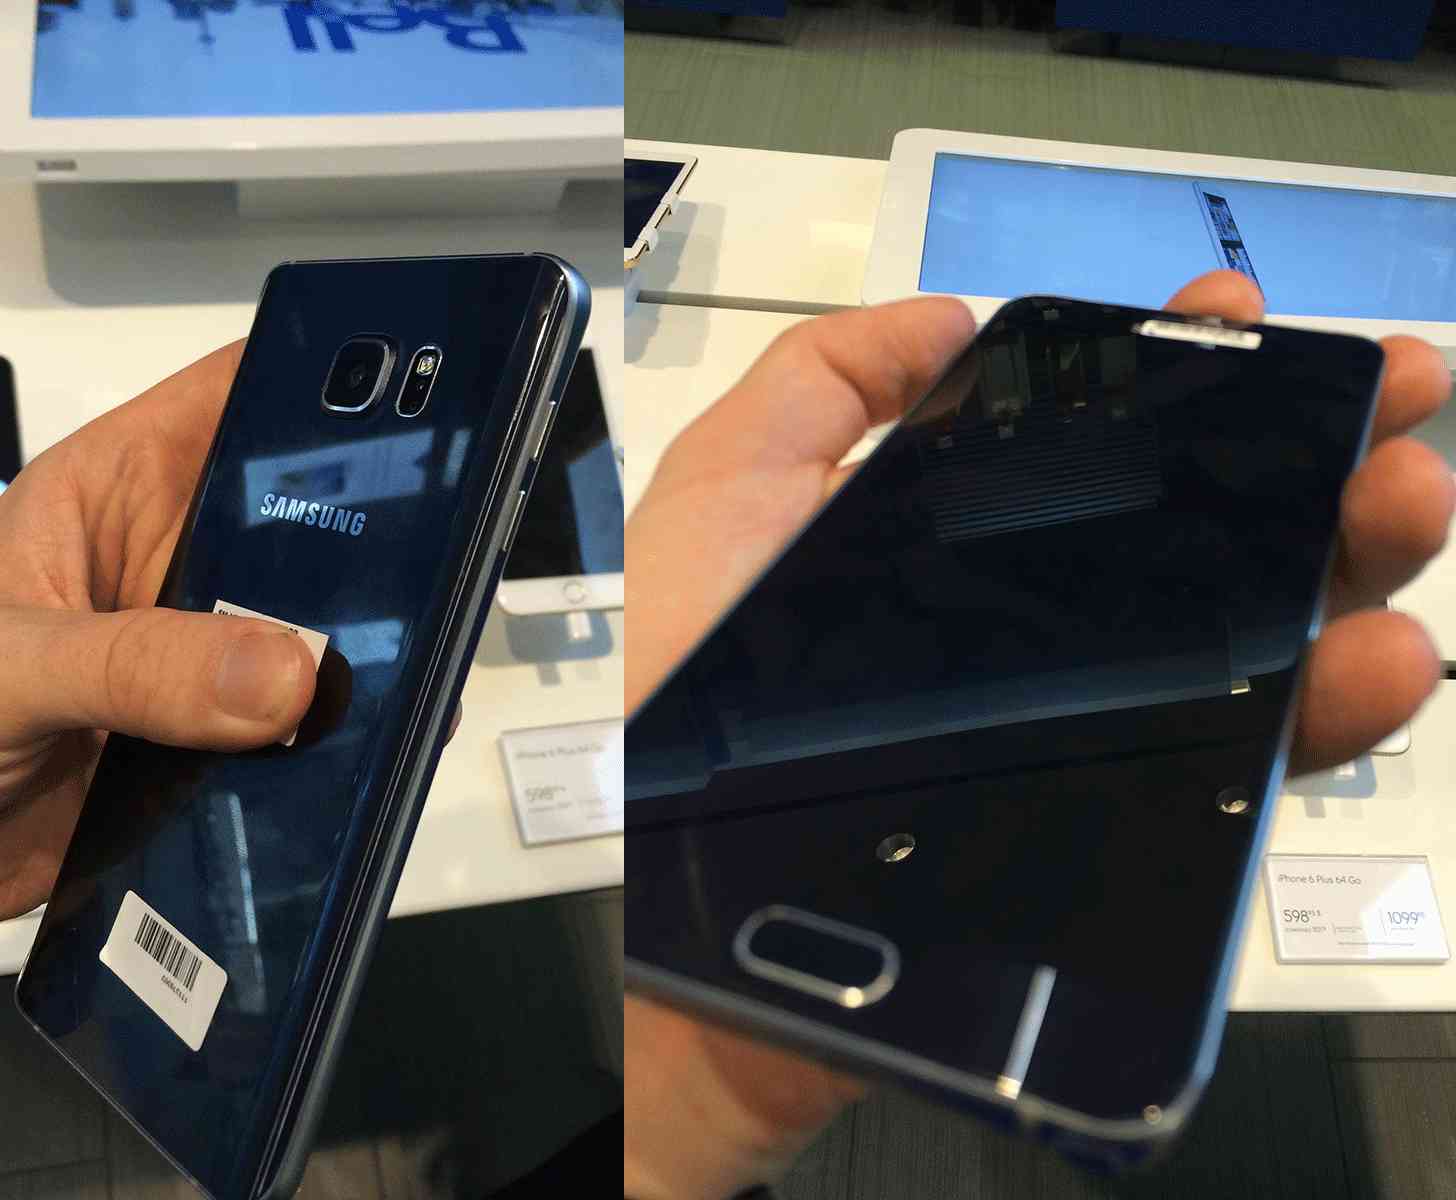 Samsung Galaxy Note 5 hands-on leak large